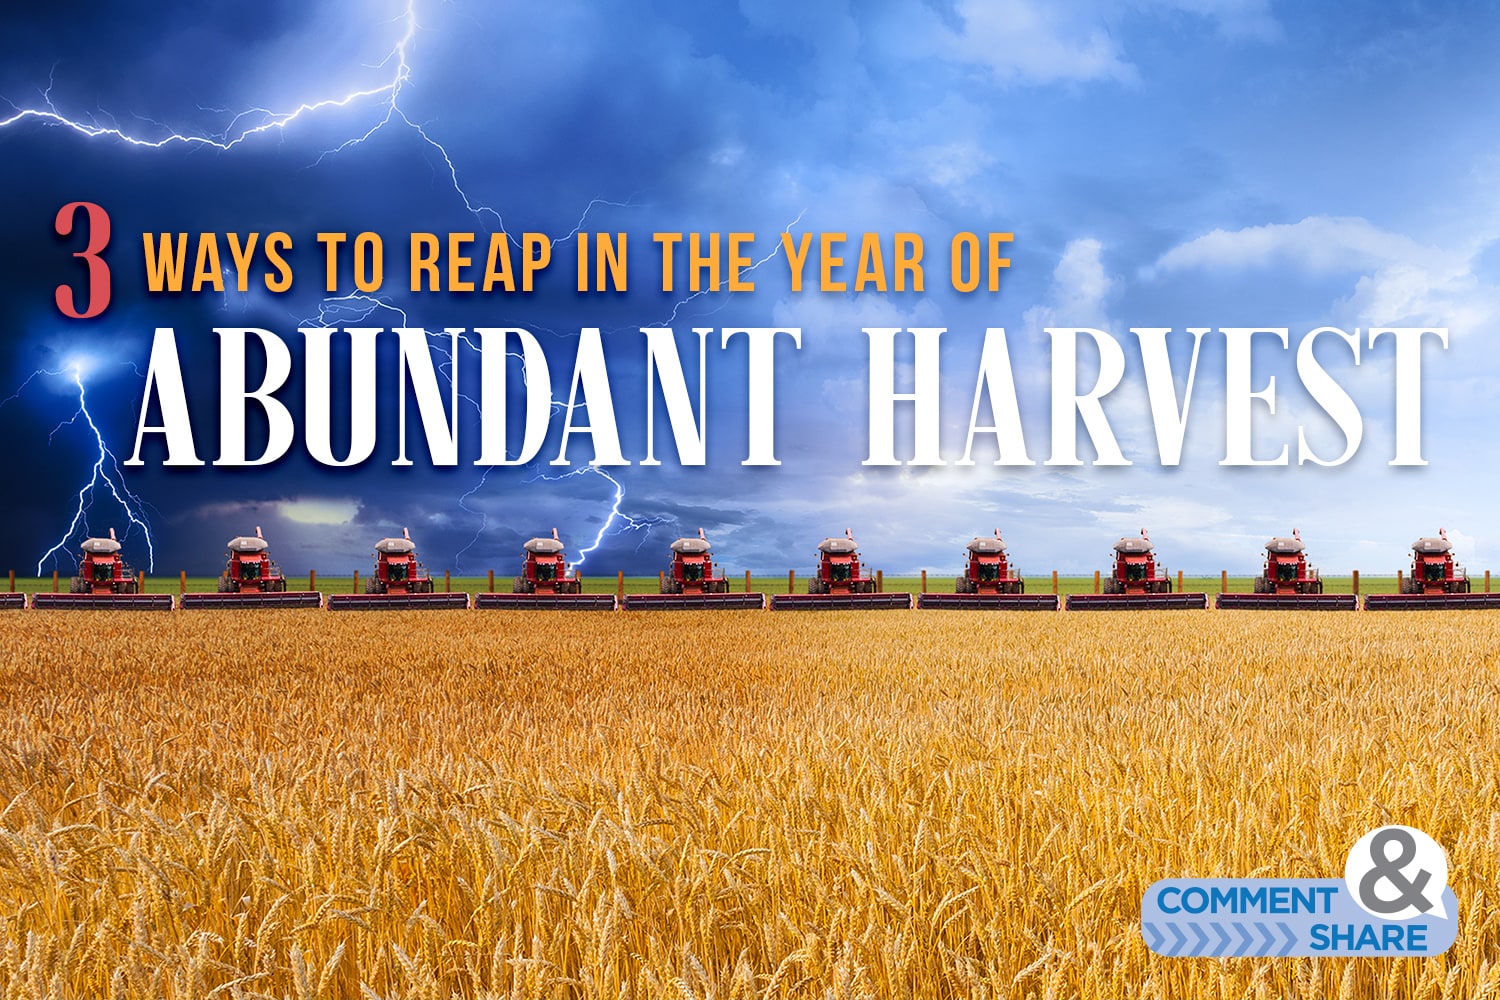 Steps to Reap in the Year of Abundant Harvest